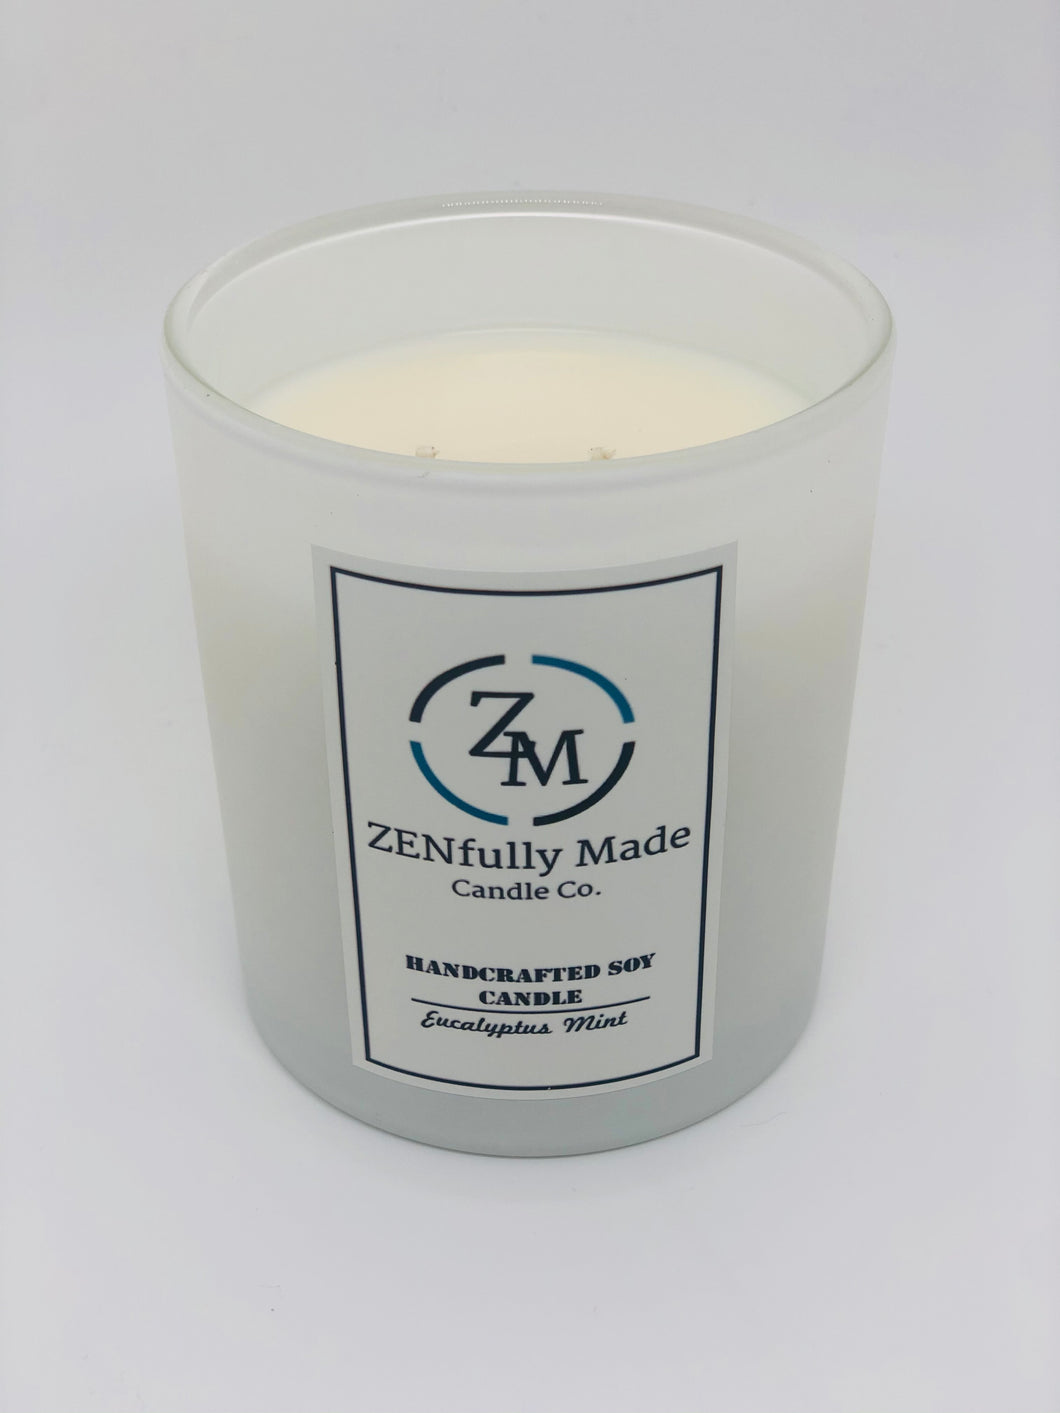 Eucalyptus Mint Aromatherapy Candle - ZENfully Made Candle Co.